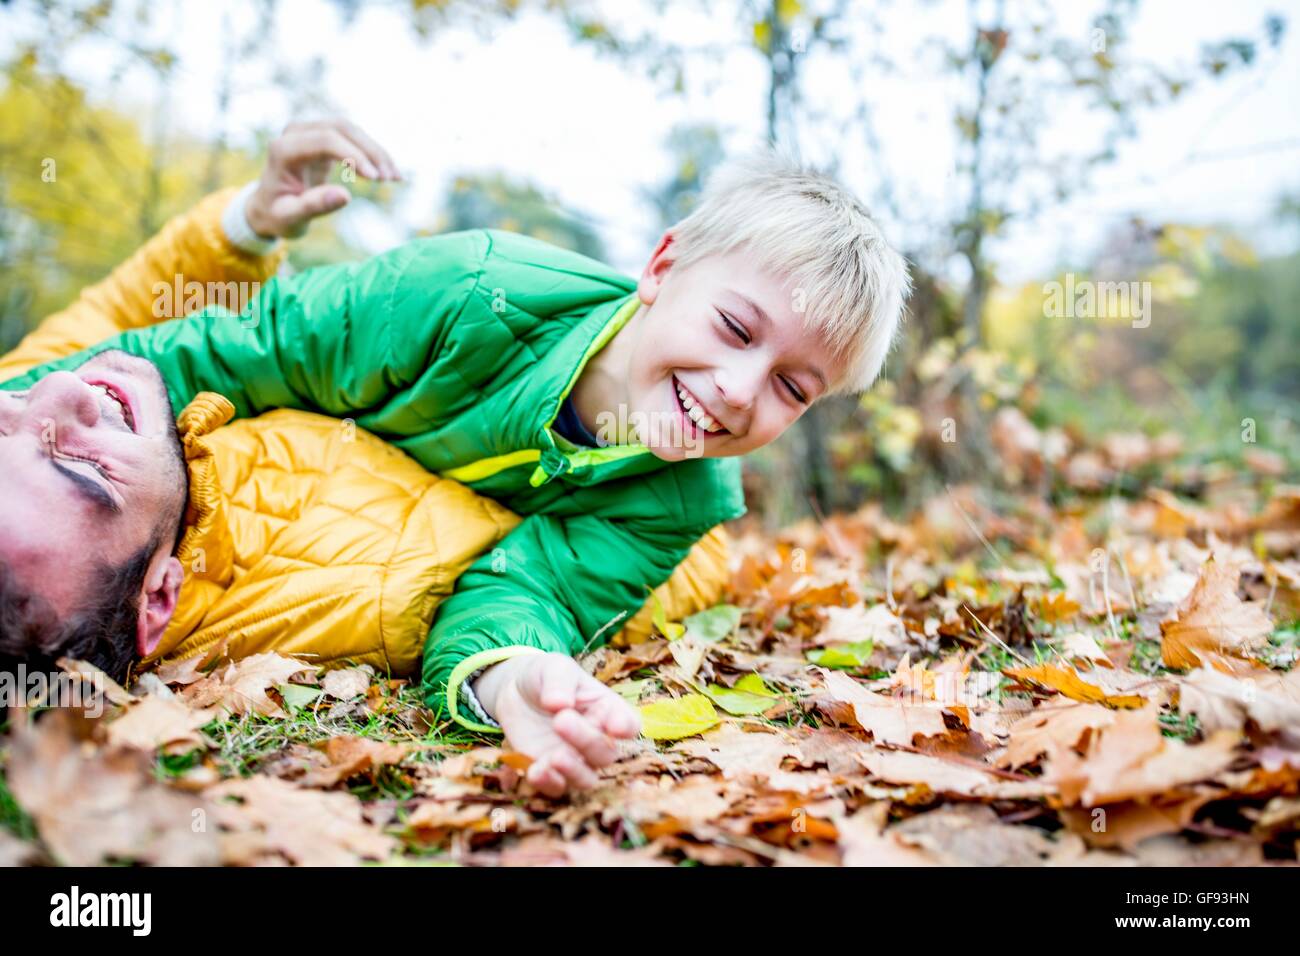 MODEL RELEASED. Father and son lying on dried leaves in autumn and laughing. Stock Photo